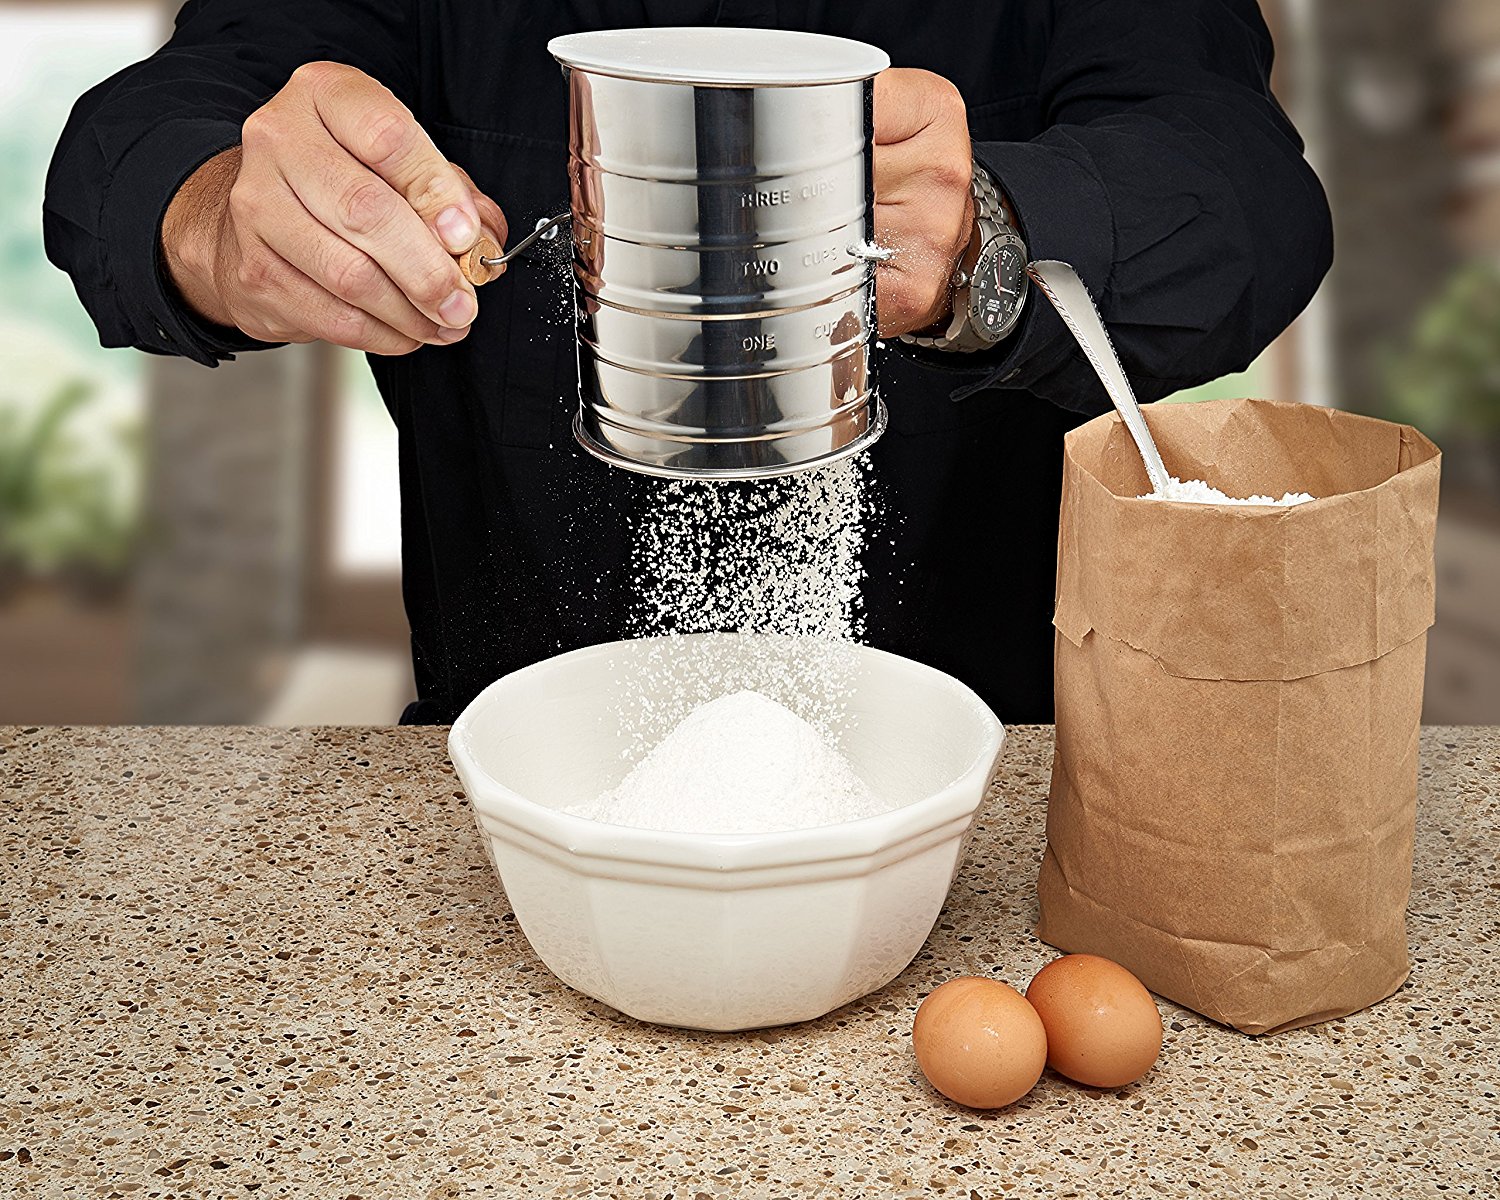 Natizo Stainless Steel 3-Cup Flour Sifter